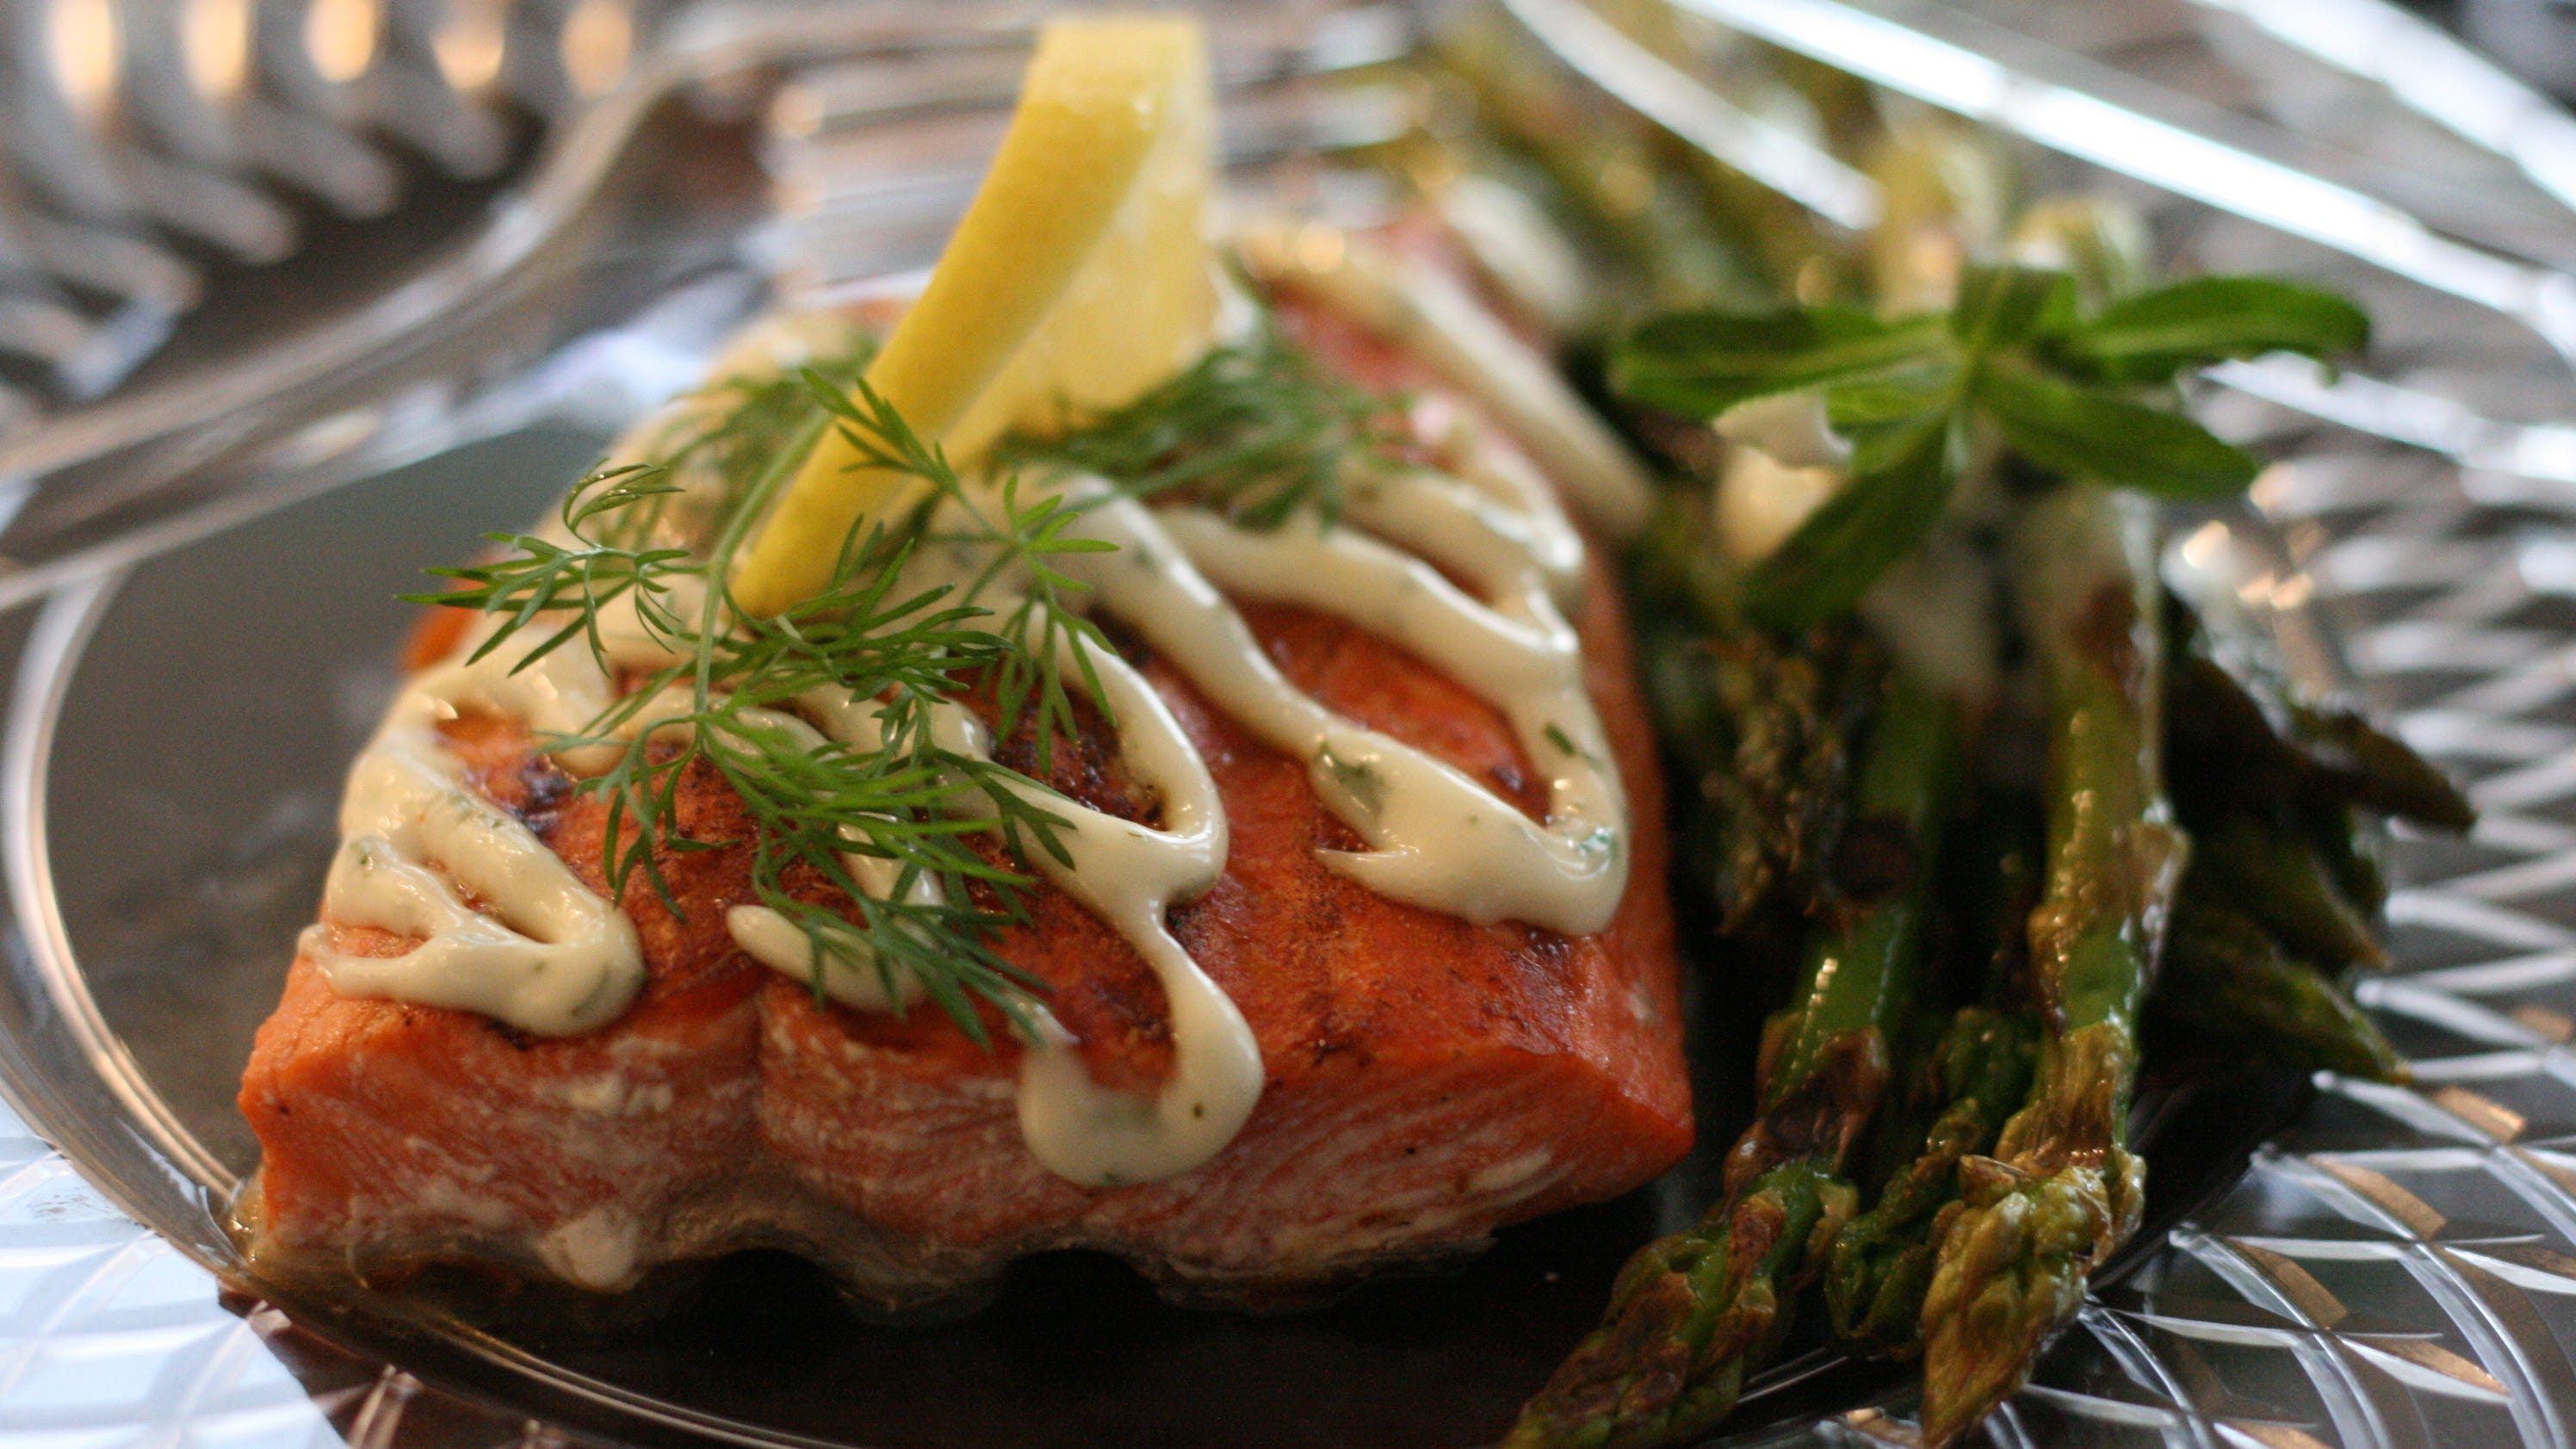 Grill up tasty salmon with help from George Foreman